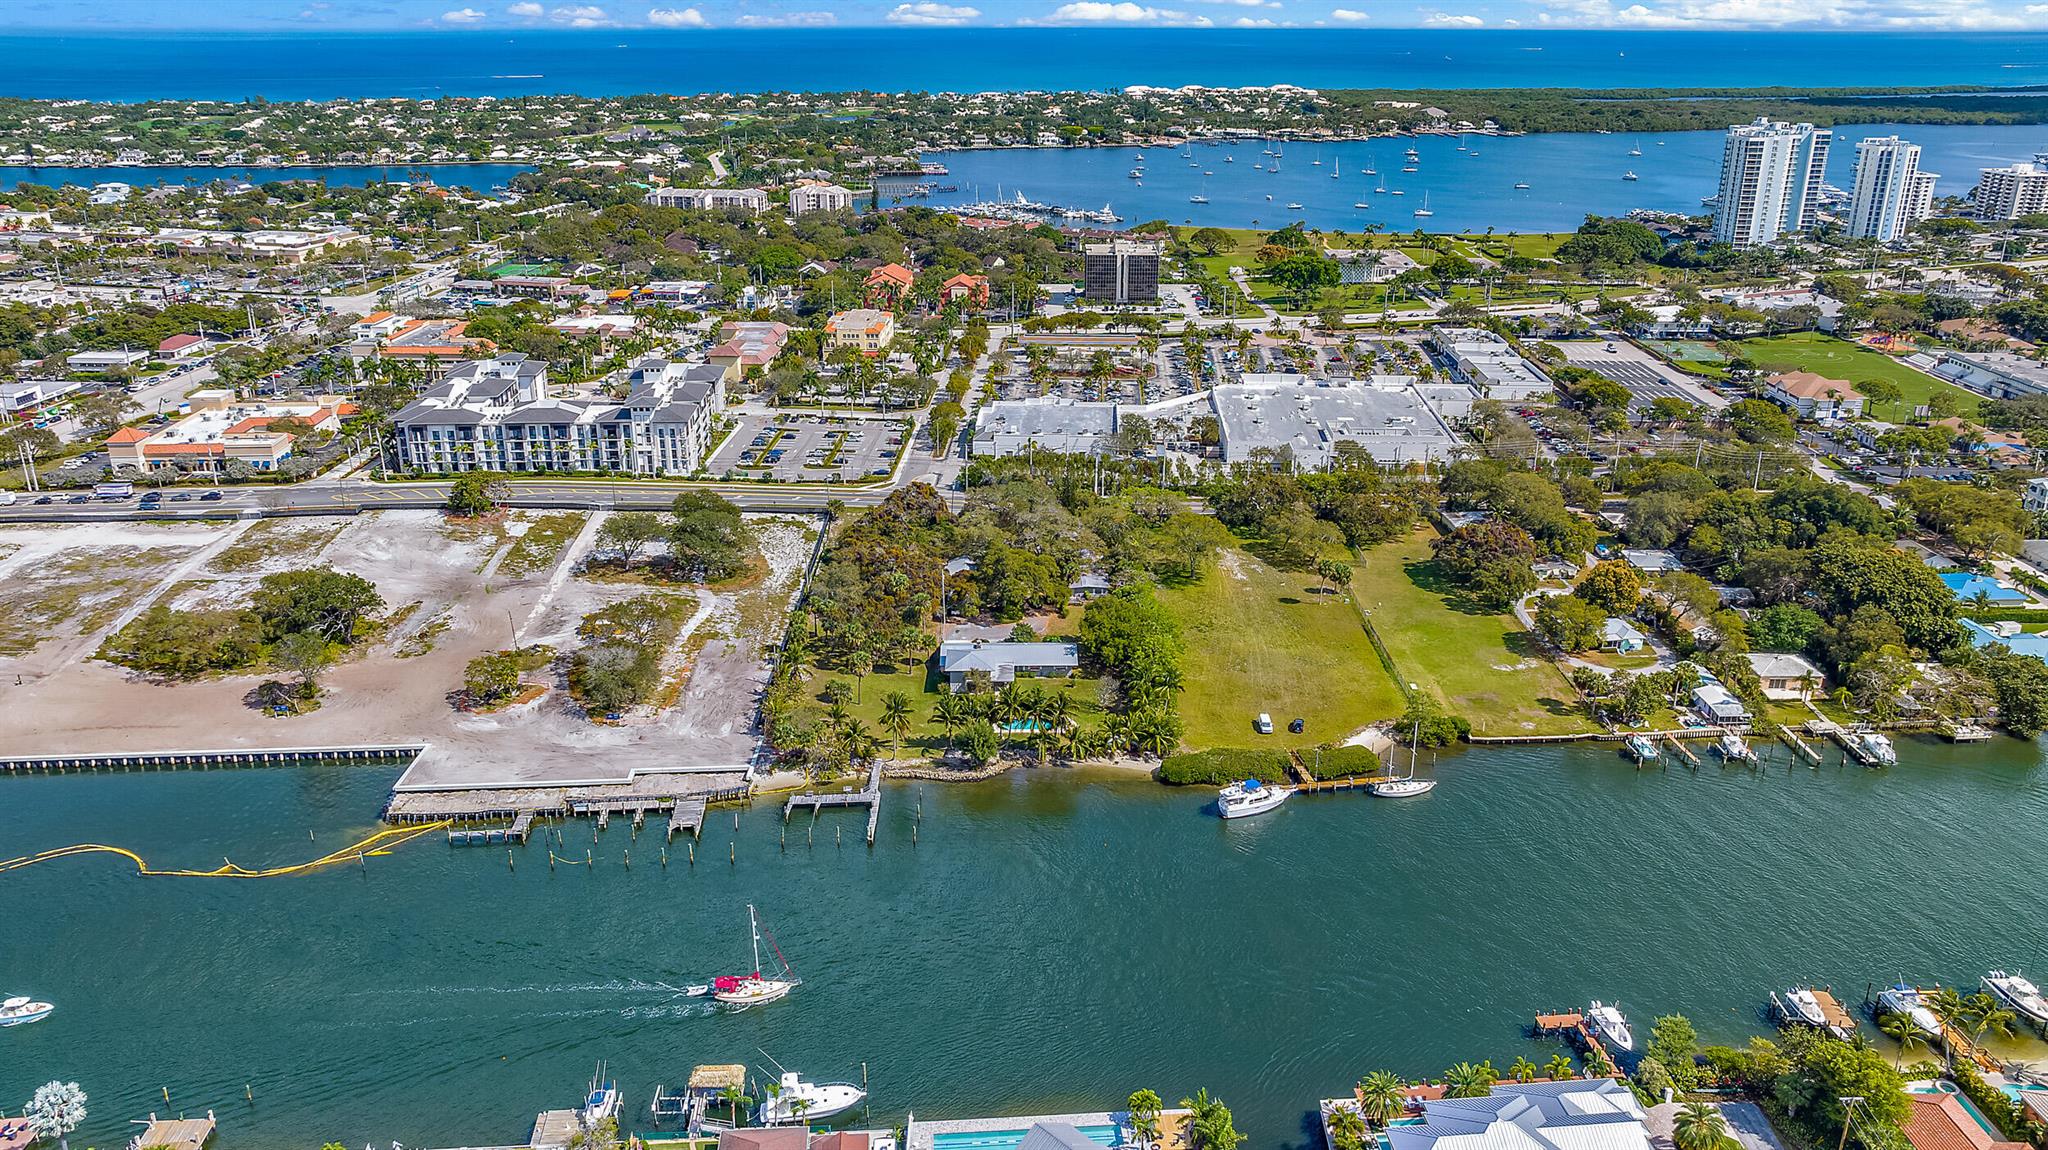 Incredible development opportunity at Ellison Wilson just south of PGA Blvd. Over 2.4 Acres located directly adjacent to the new RitzCarlton Residences Palm Beach Gardens. Property has more than 240 feet of waterfront along the intracoastal waterway. Structures on property subject to Demolition/Teardown.